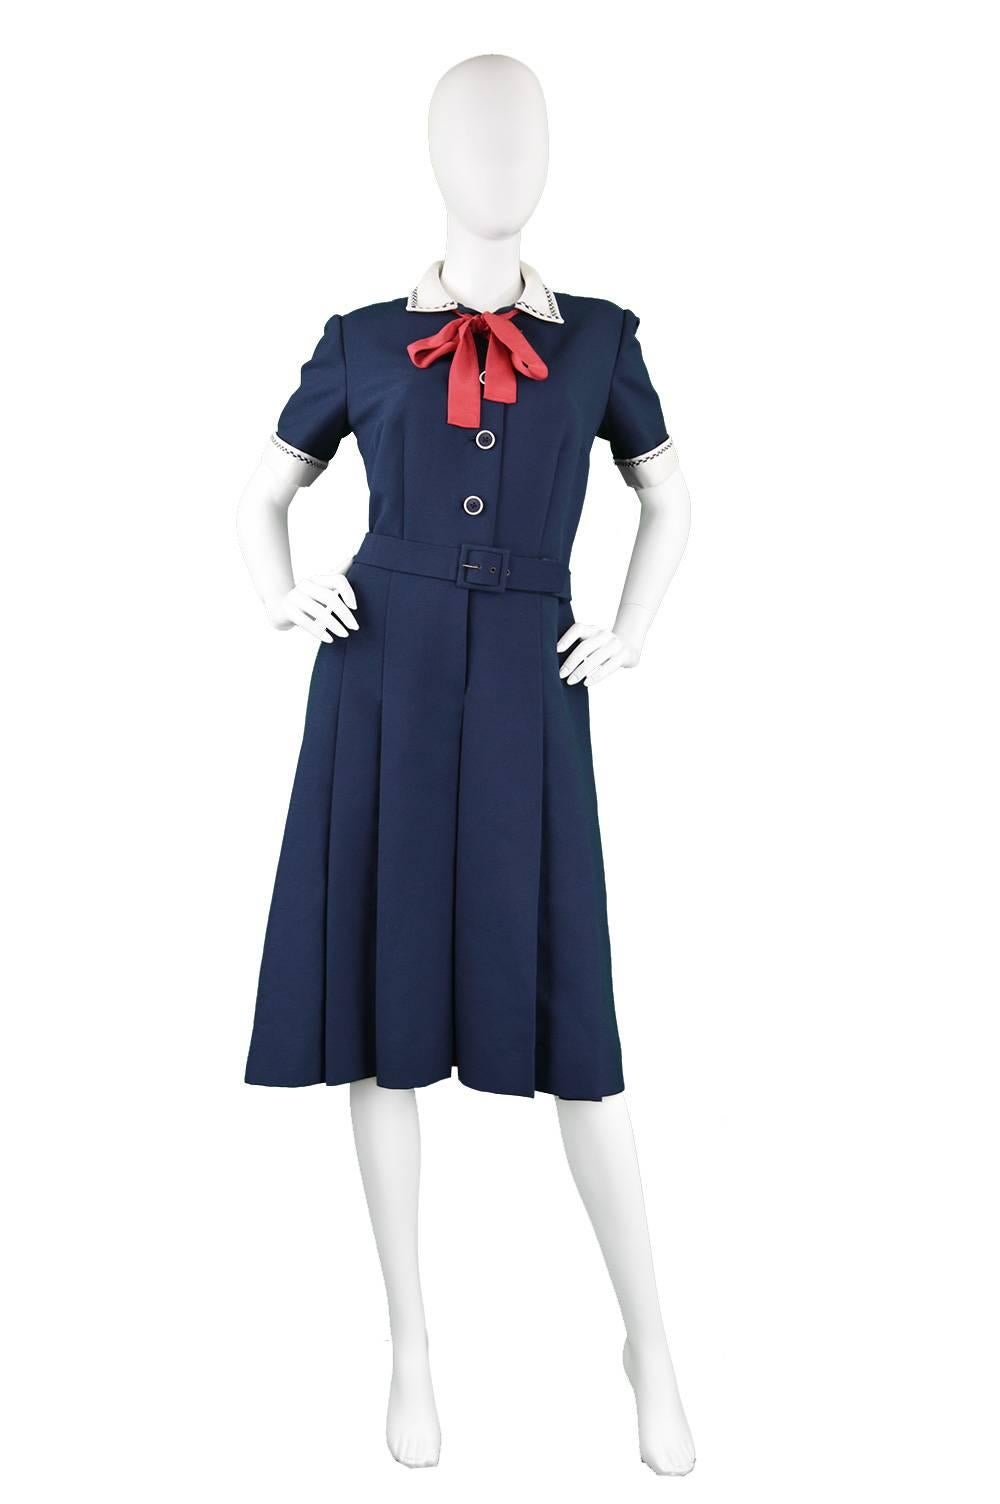 An incredible vintage nautical vintage dress from the 1960s by legendary designer label, Christian Dior during Marc Bohan's reign as creative director. In a classic navy blue with a white collar and cuffs with a contrasting bright red pussybow